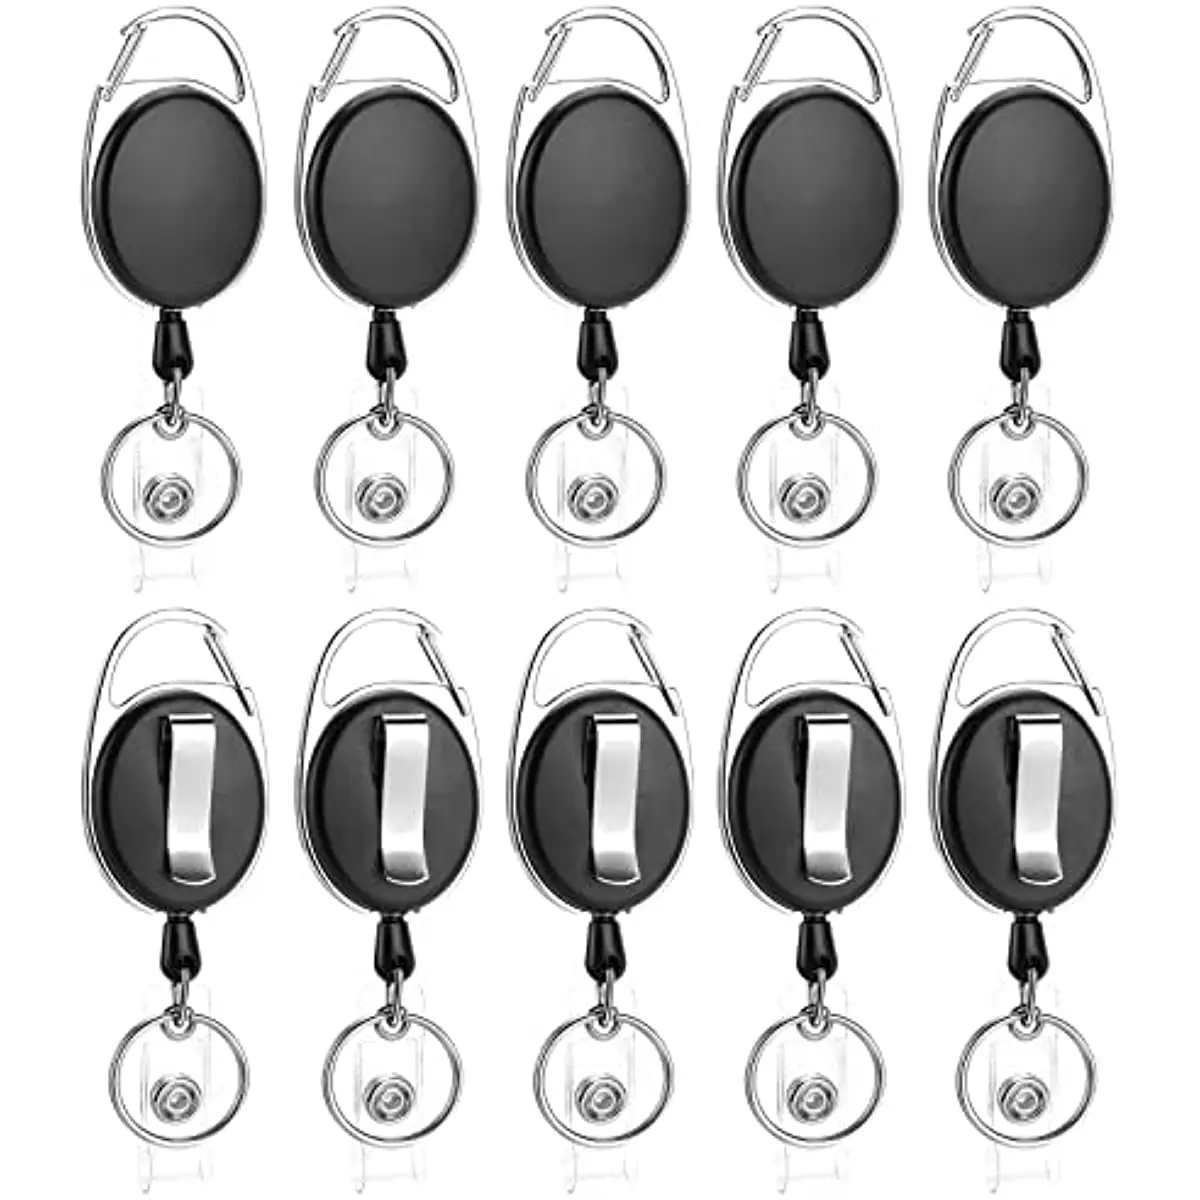 https://ae01.alicdn.com/kf/S502c5c98874e4573bf6908509e49b3d6V/Retractable-Badge-Reel-with-Carabiner-Belt-Clip-and-Key-Ring-Retractable-ID-Badge-Holders-for-ID.jpg